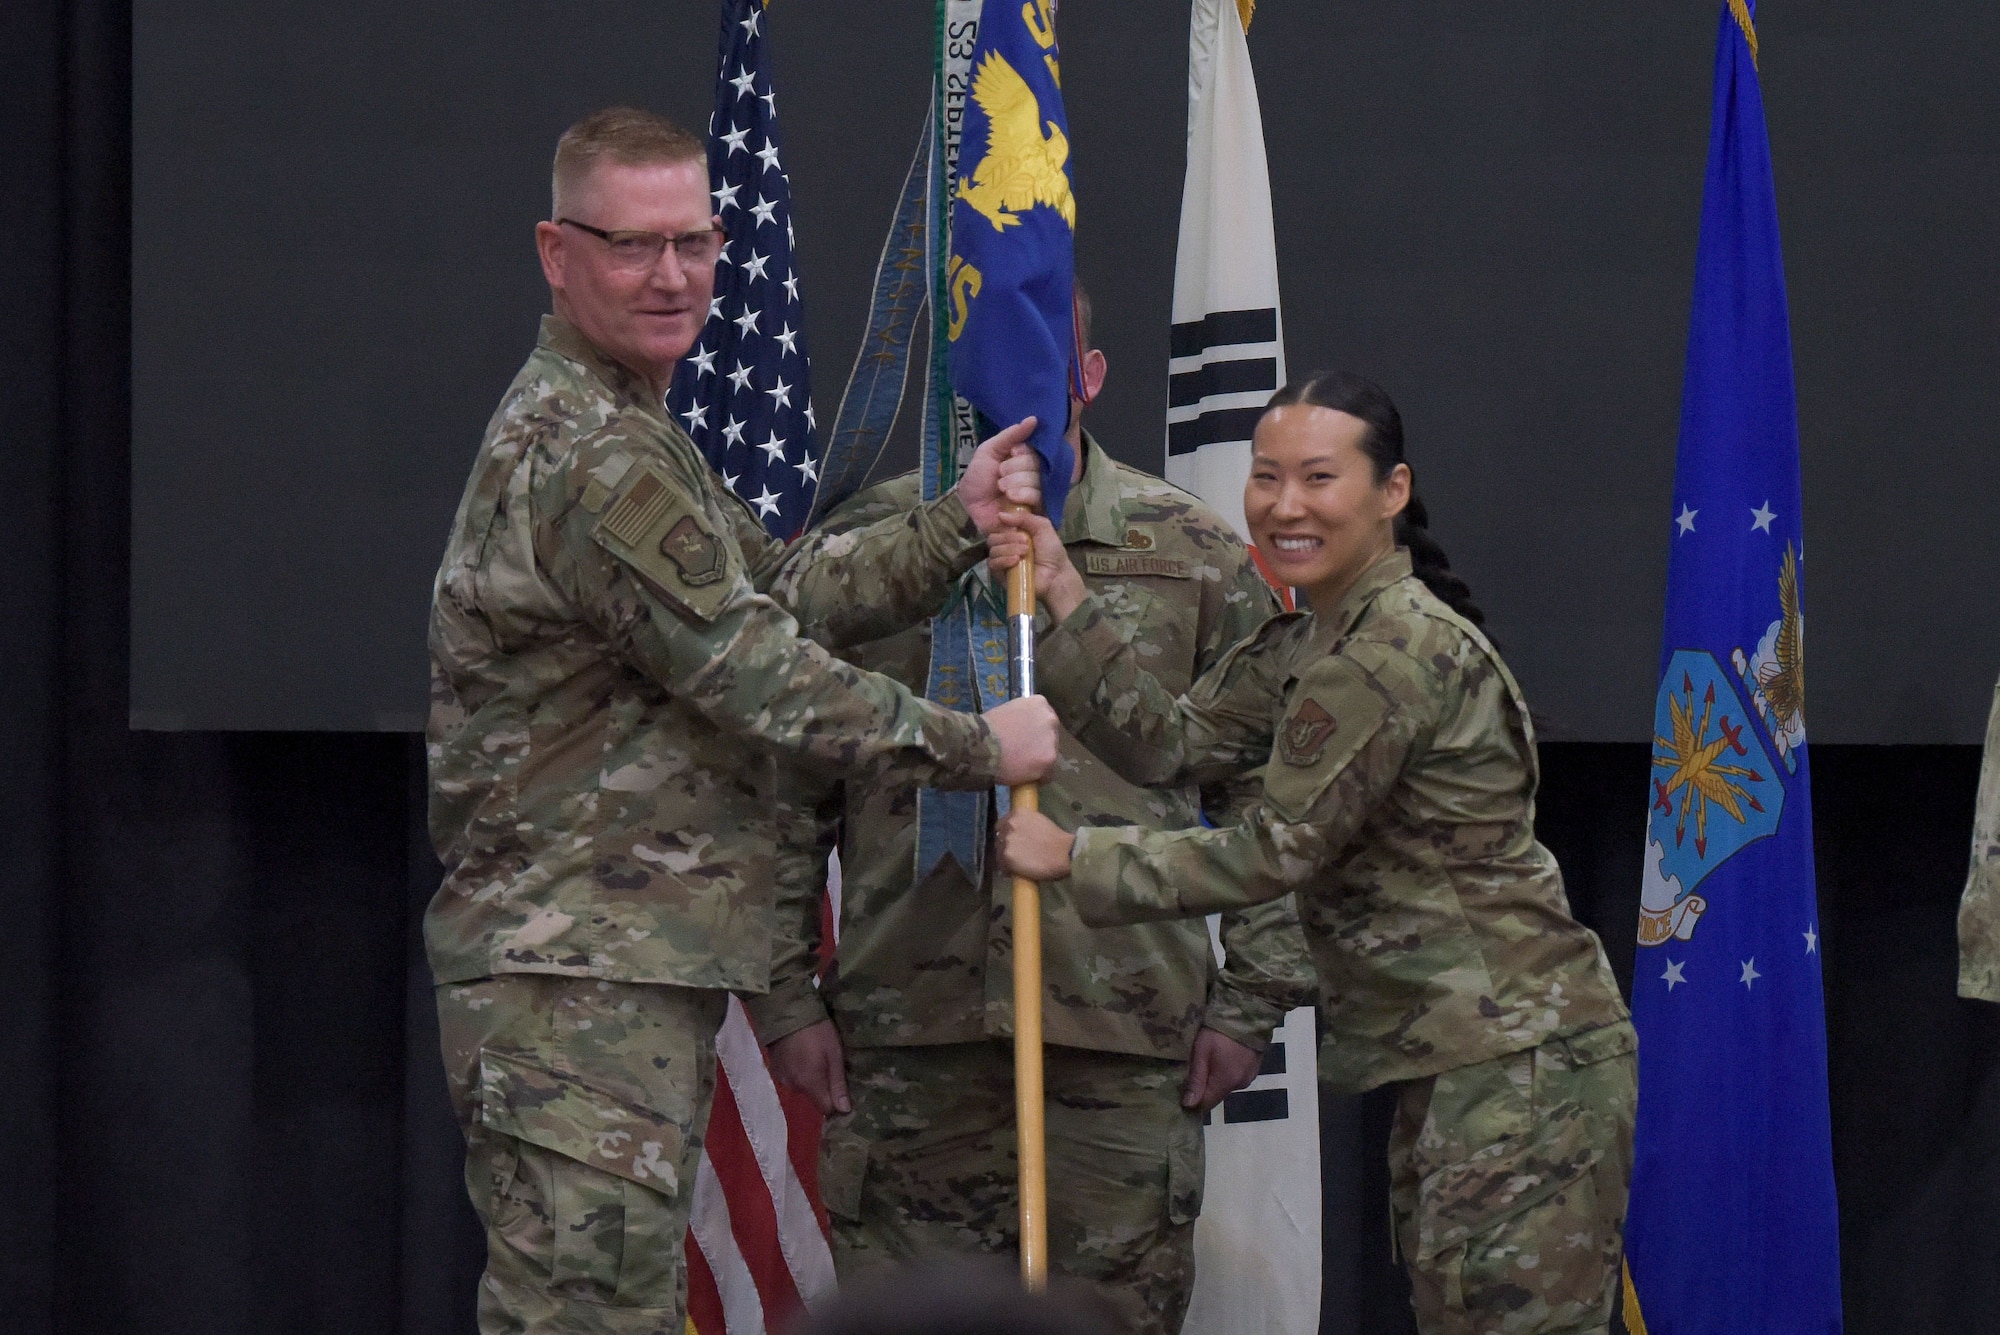 Col. Brian Moore, left, 51st Maintenance Group commander, presents Maj. Anna Jung, 51st Maintenance Squadron incoming commander, the 51st MXS guidon during the 51st MXS change of command ceremony at Osan Air Base, Republic of Korea, May 23, 2022.